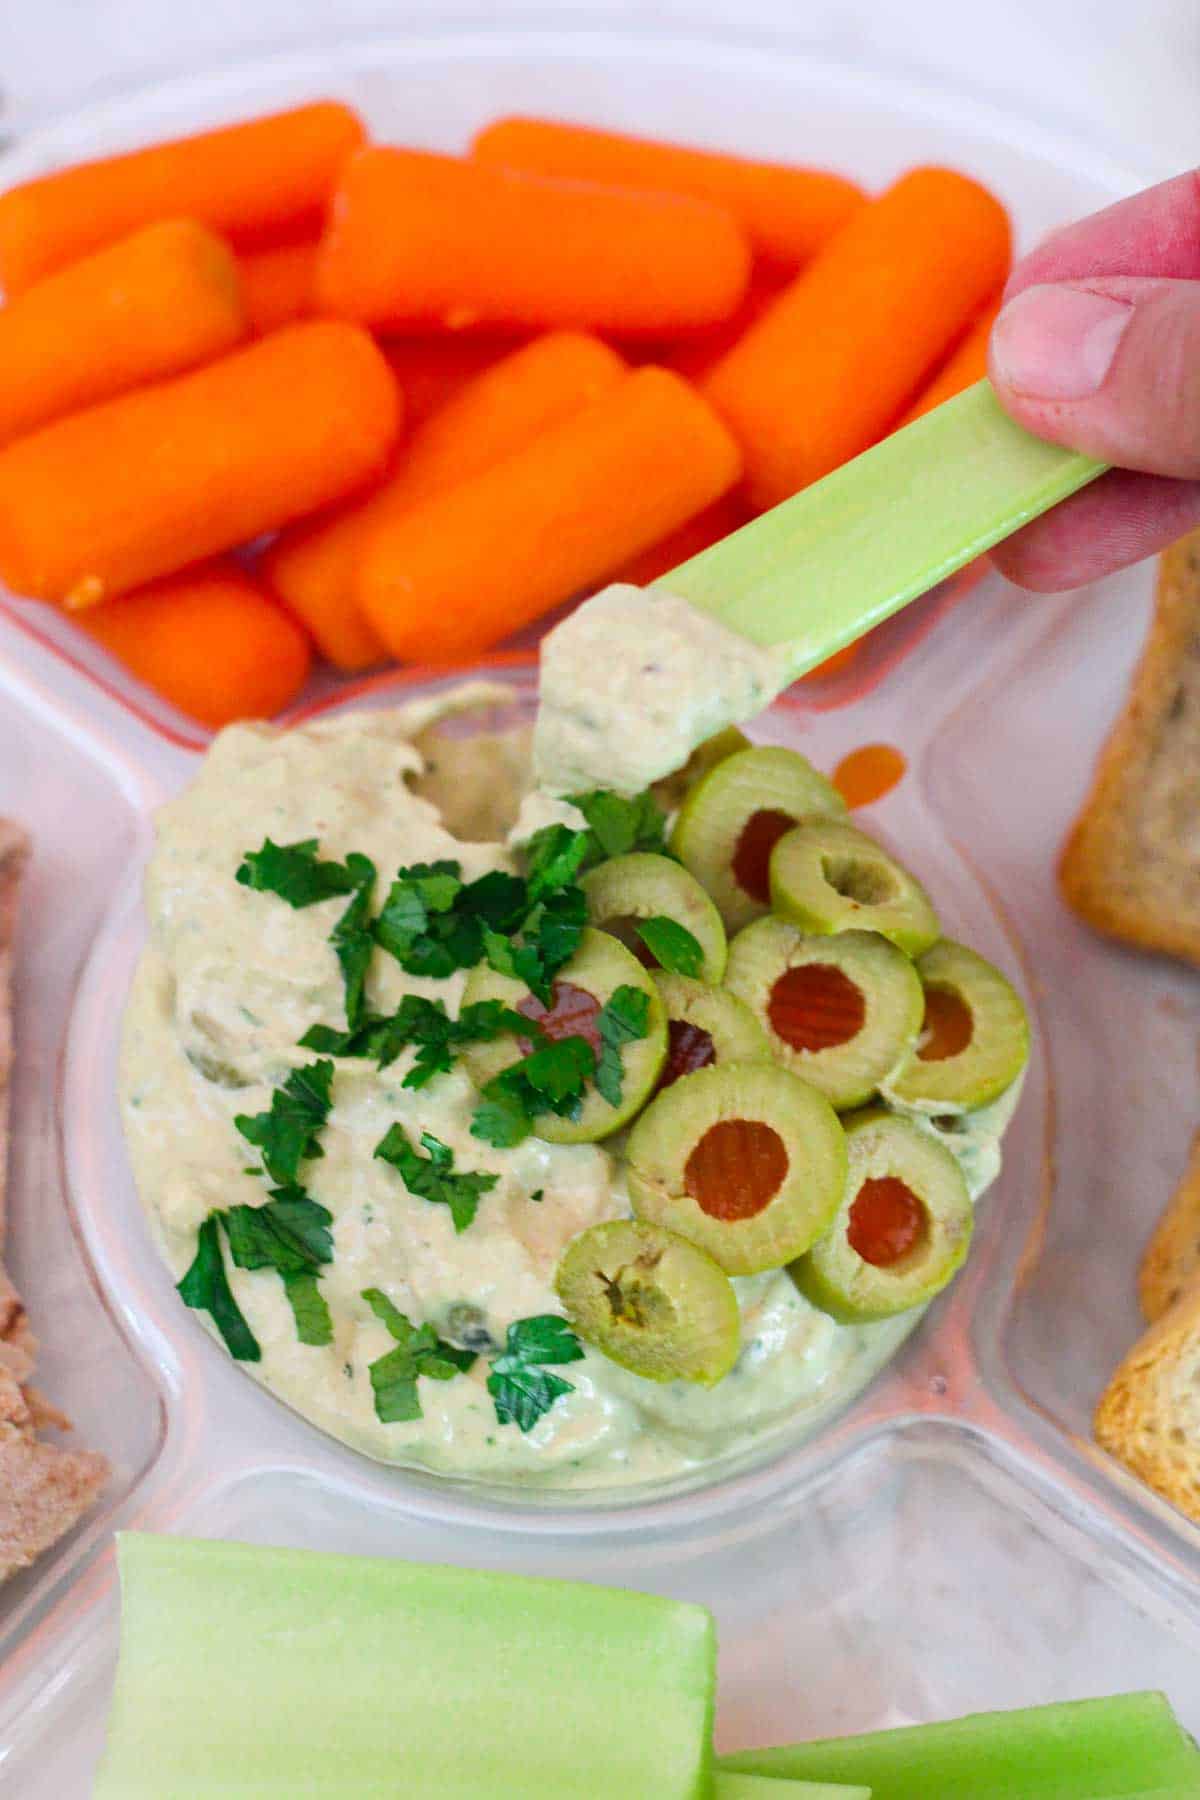 Tuna dip garnished with sliced green olives and parsley. There's a celery stick being dipped in the tuna dip in this picture. You can see carrots, and other sides next to the dip.